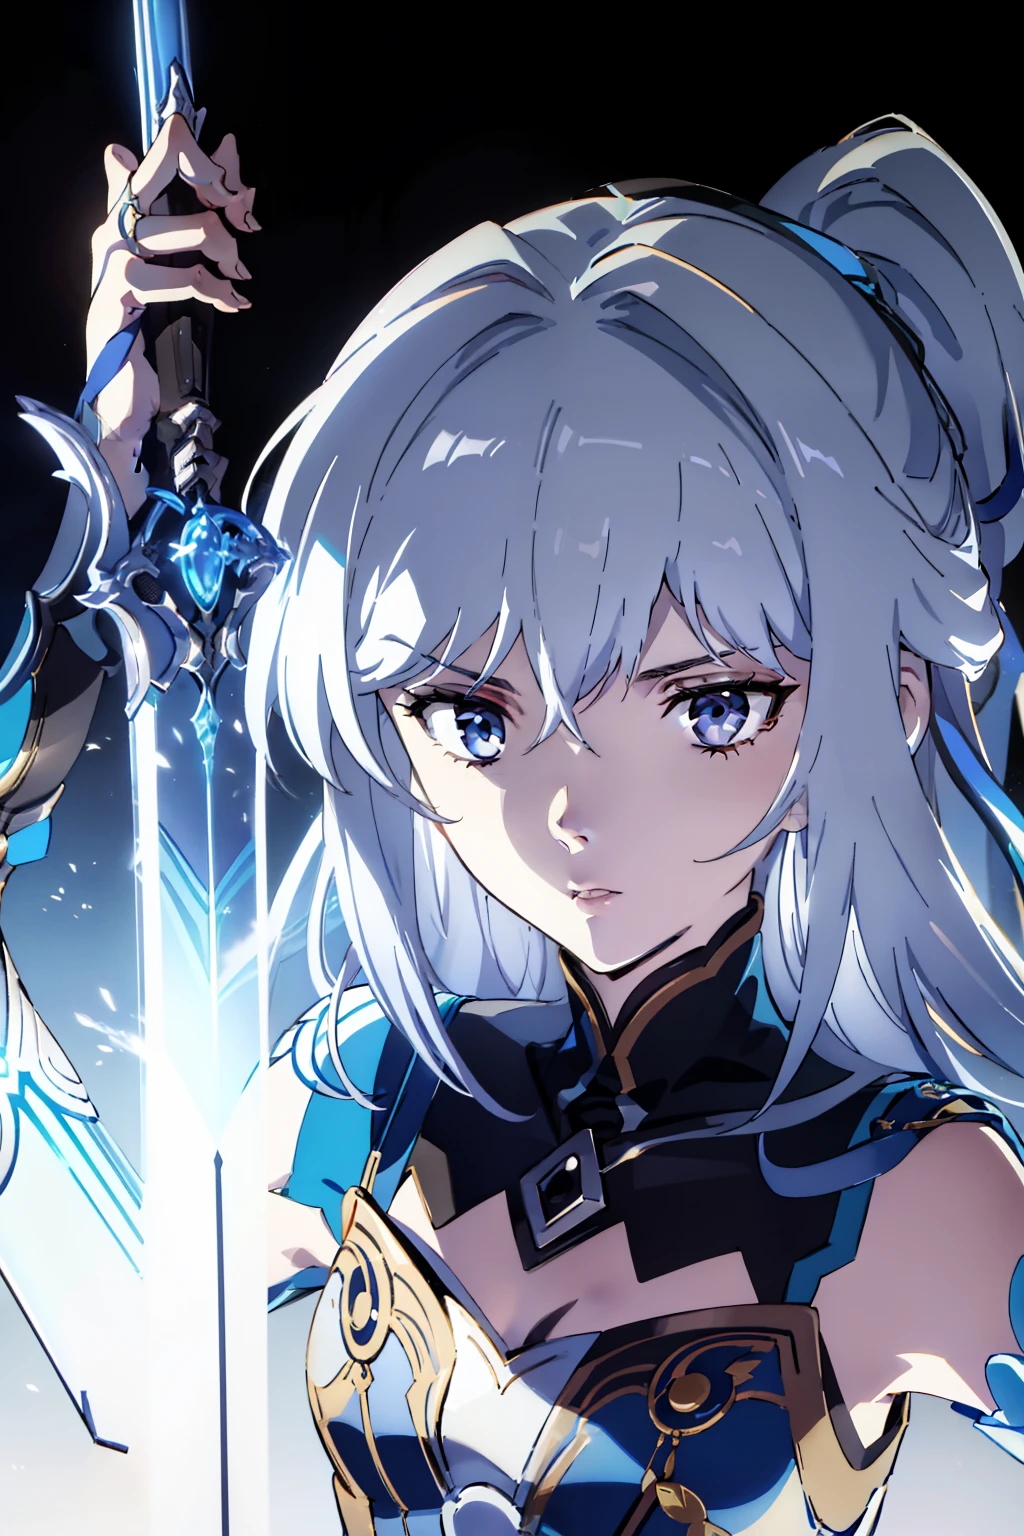 Female, 18 years old, bright blue eyes, cool gaze, Detailed face, silver hair, short, pale skin, white and brown adventurer outfit, Crystal sword on waist, white background, front camera